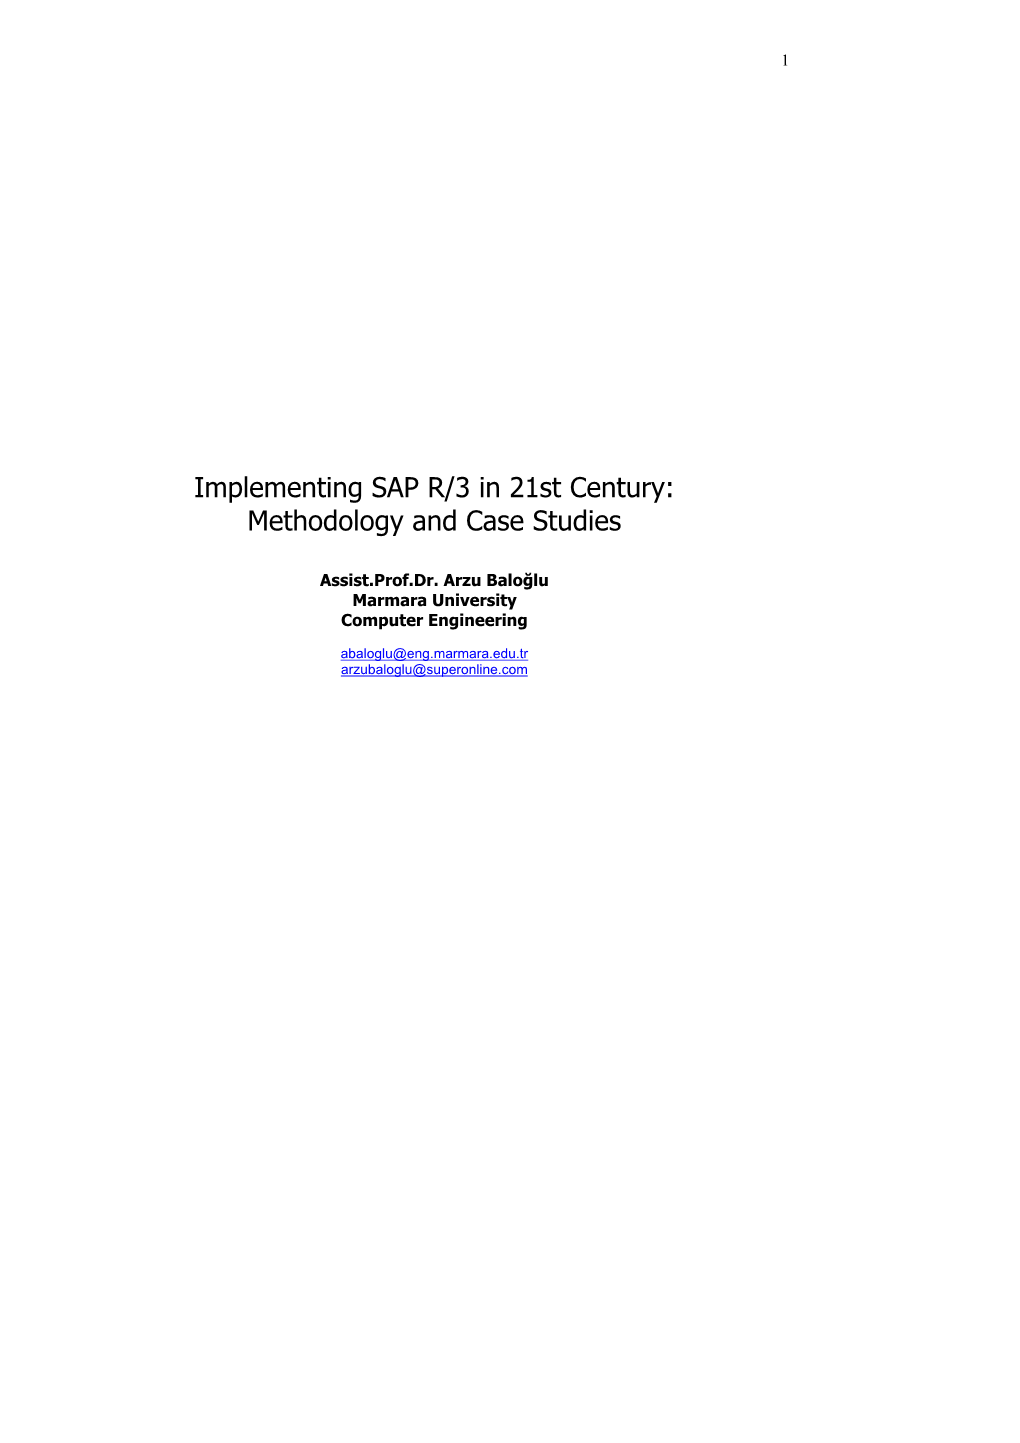 Implementing SAP R/3 in 21St Century: Methodology and Case Studies